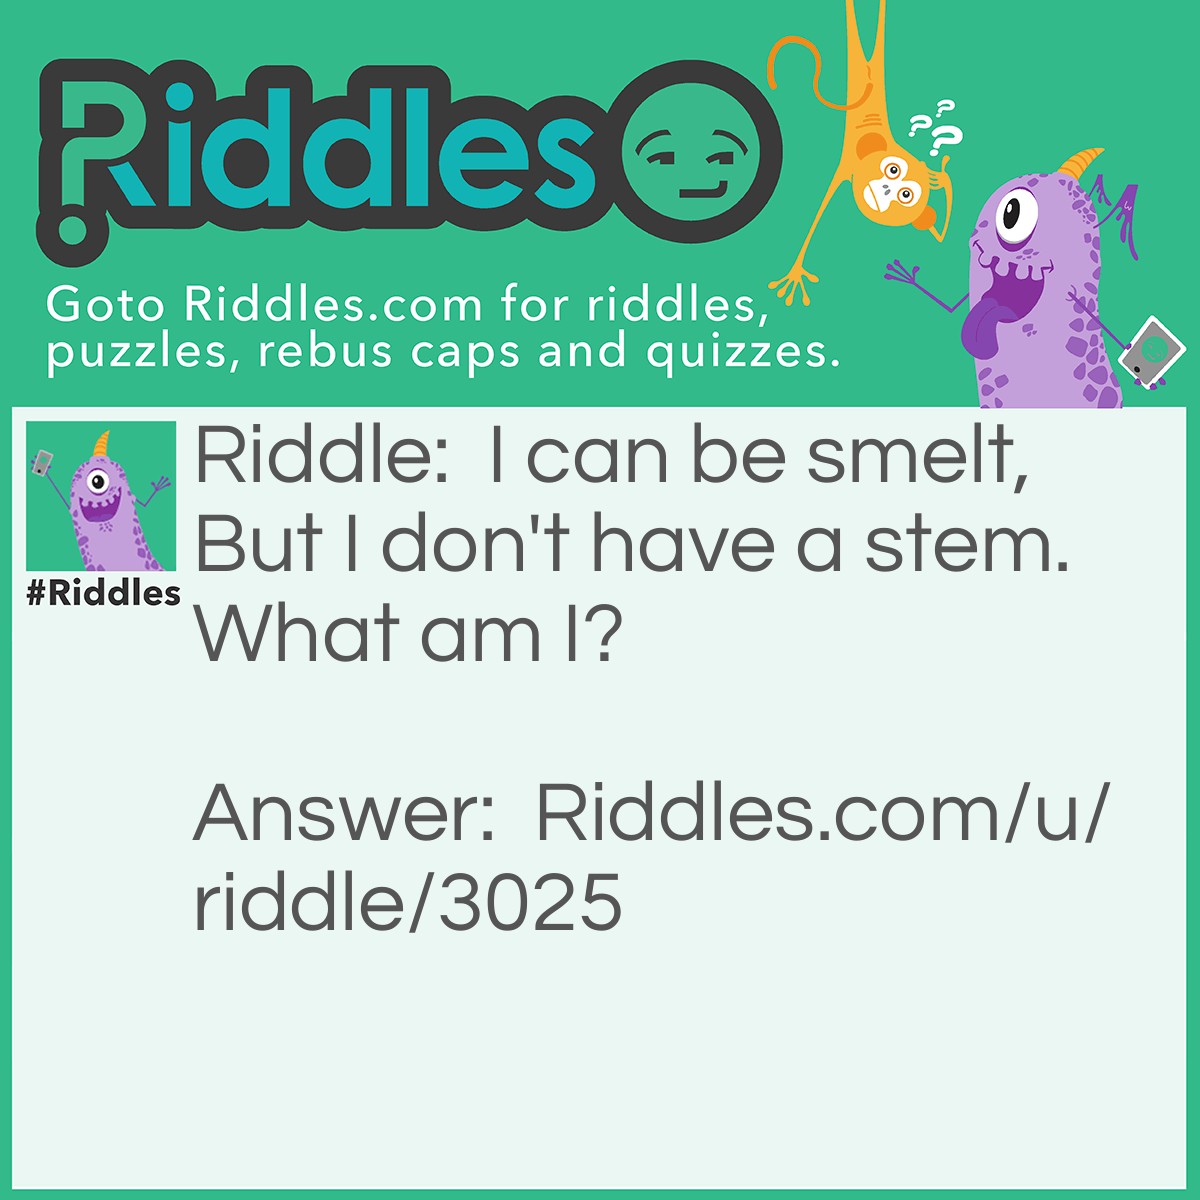 Riddle: I can be smelt, But I don't have a stem. What am I? Answer: Your breath.